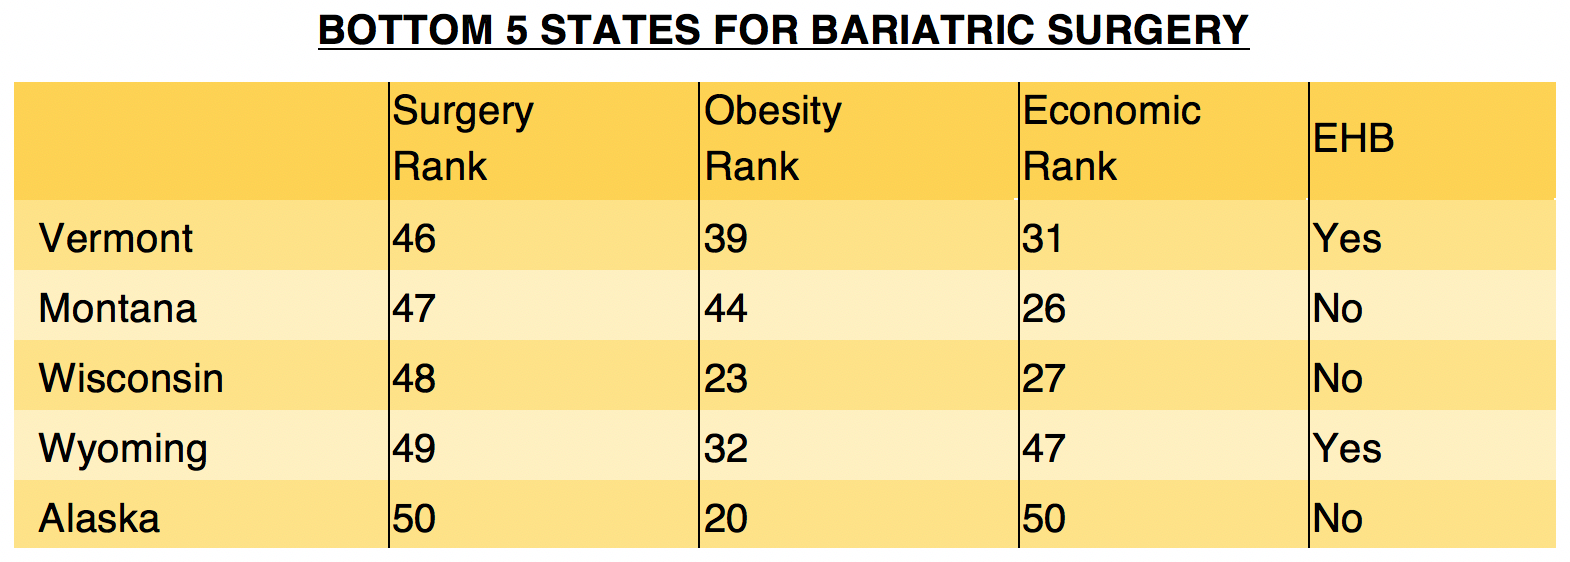 BOTTOM 5 STATES FOR BARIATRIC SURGERY